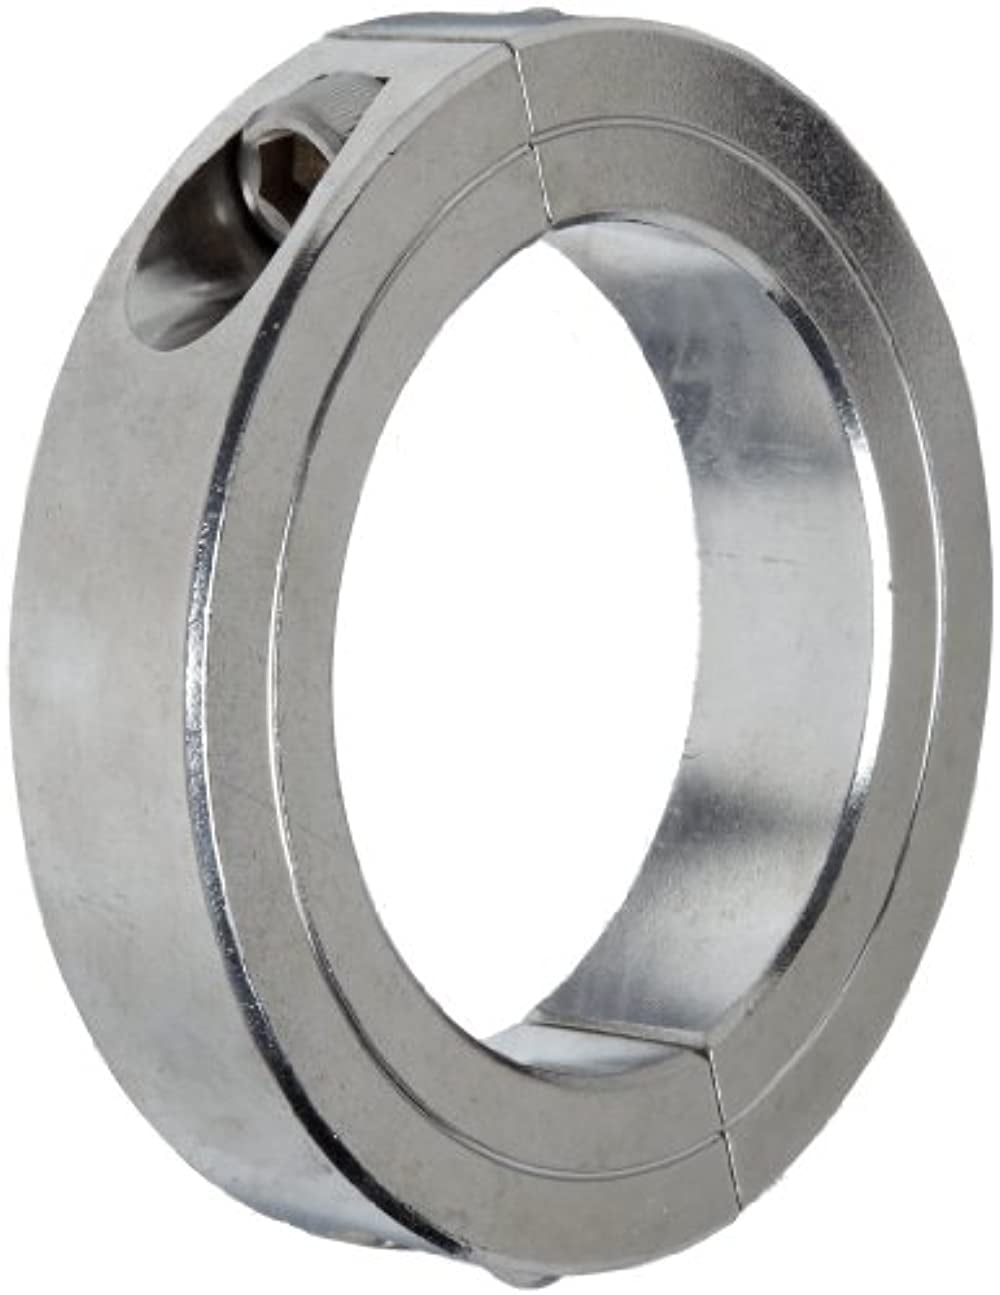 Climax Metal 2C-018-S T303 Stainless Steel Two-Piece Clamping Collar, 3/16